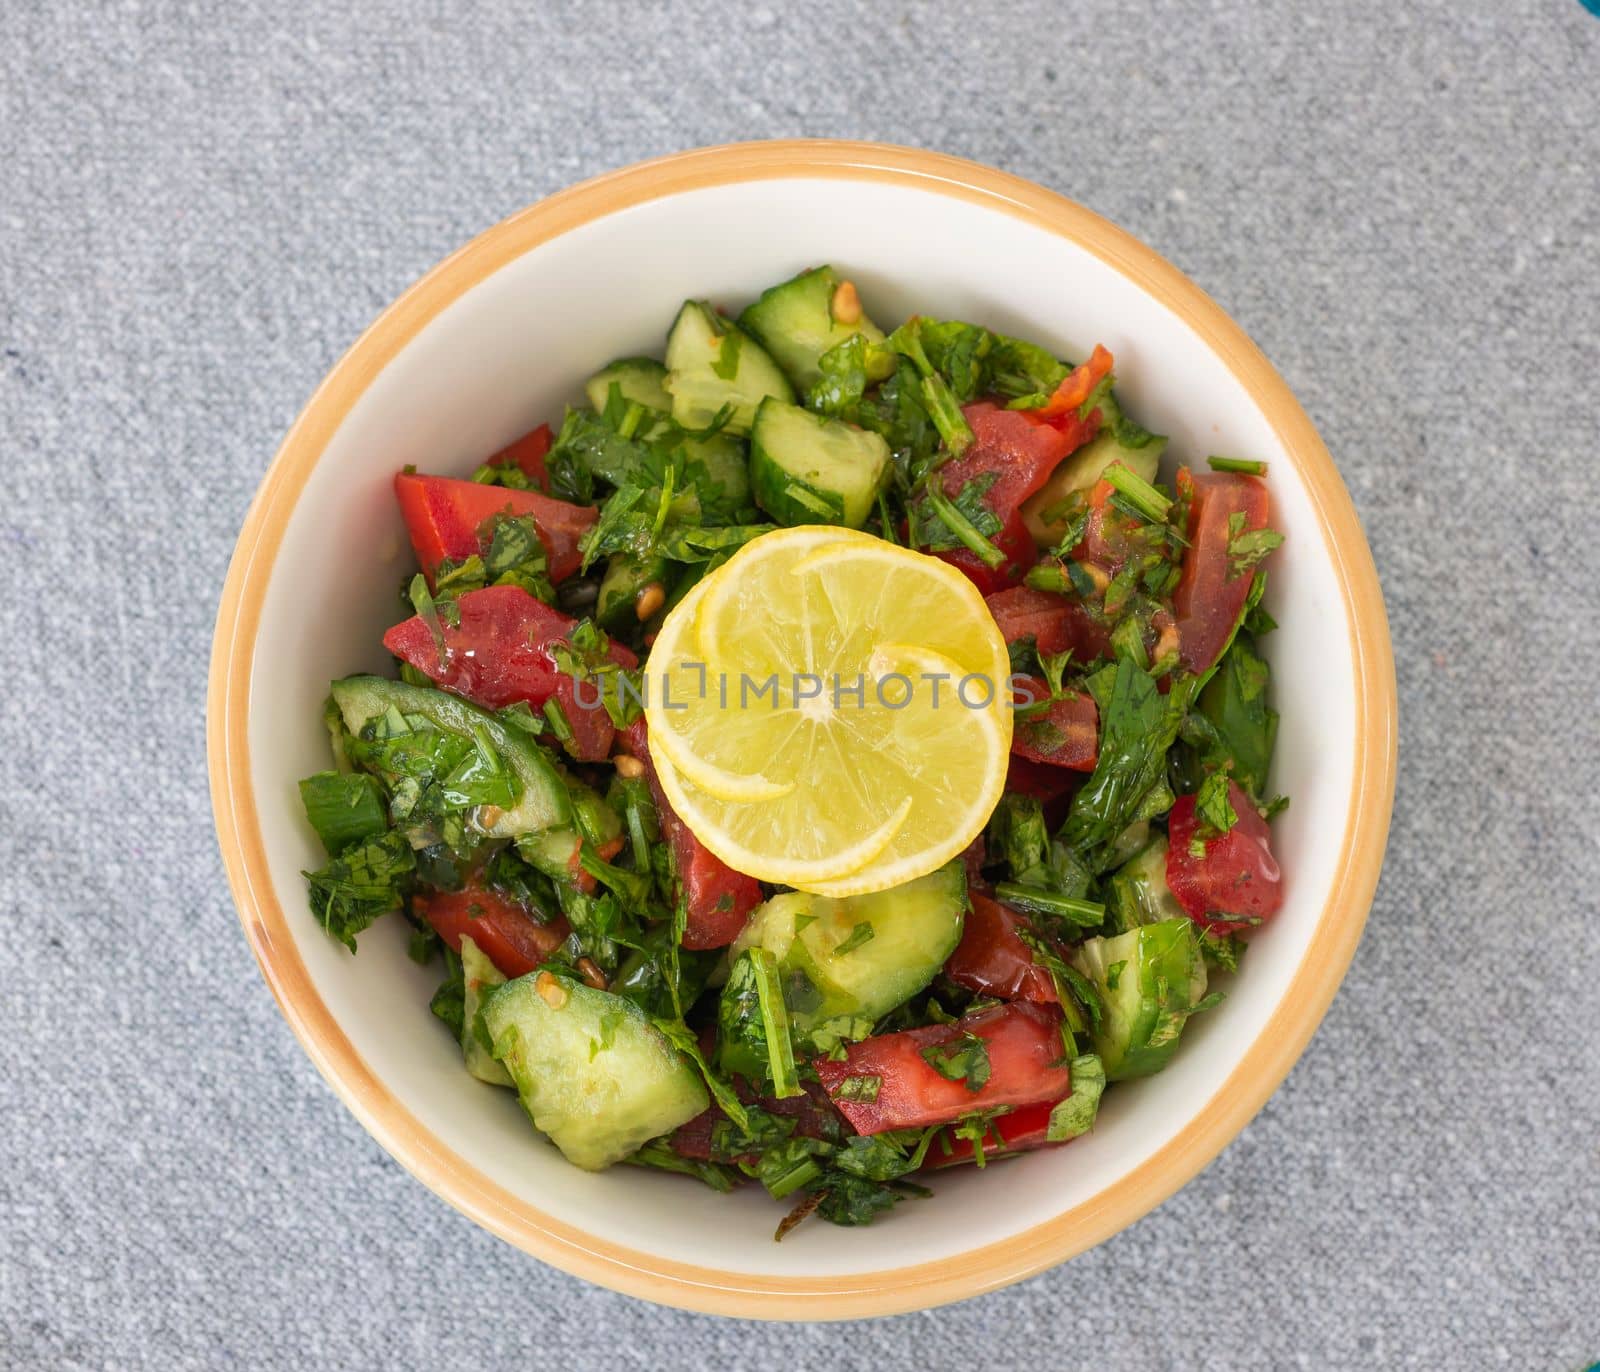 Mixed salad with lemon in a dish by paulvinten